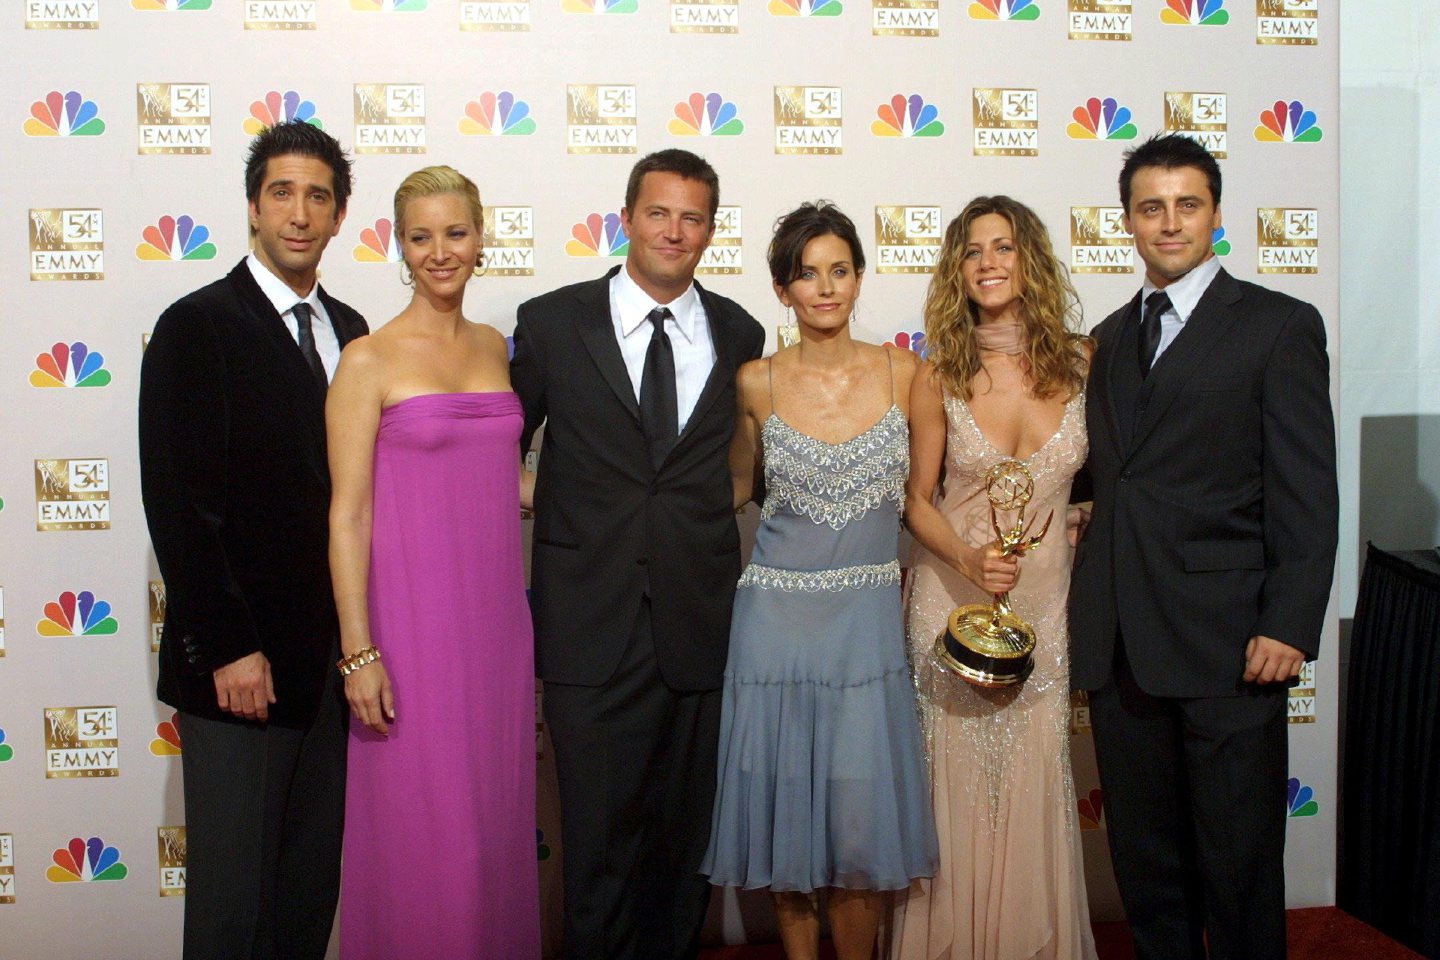 The cast of Friends - David Schwimmer, Lisa Kudrow, Matthew Perry, Courtney Cox, Jennifer Aniston and Matt Le Blanc - at the 2002 Emmys.